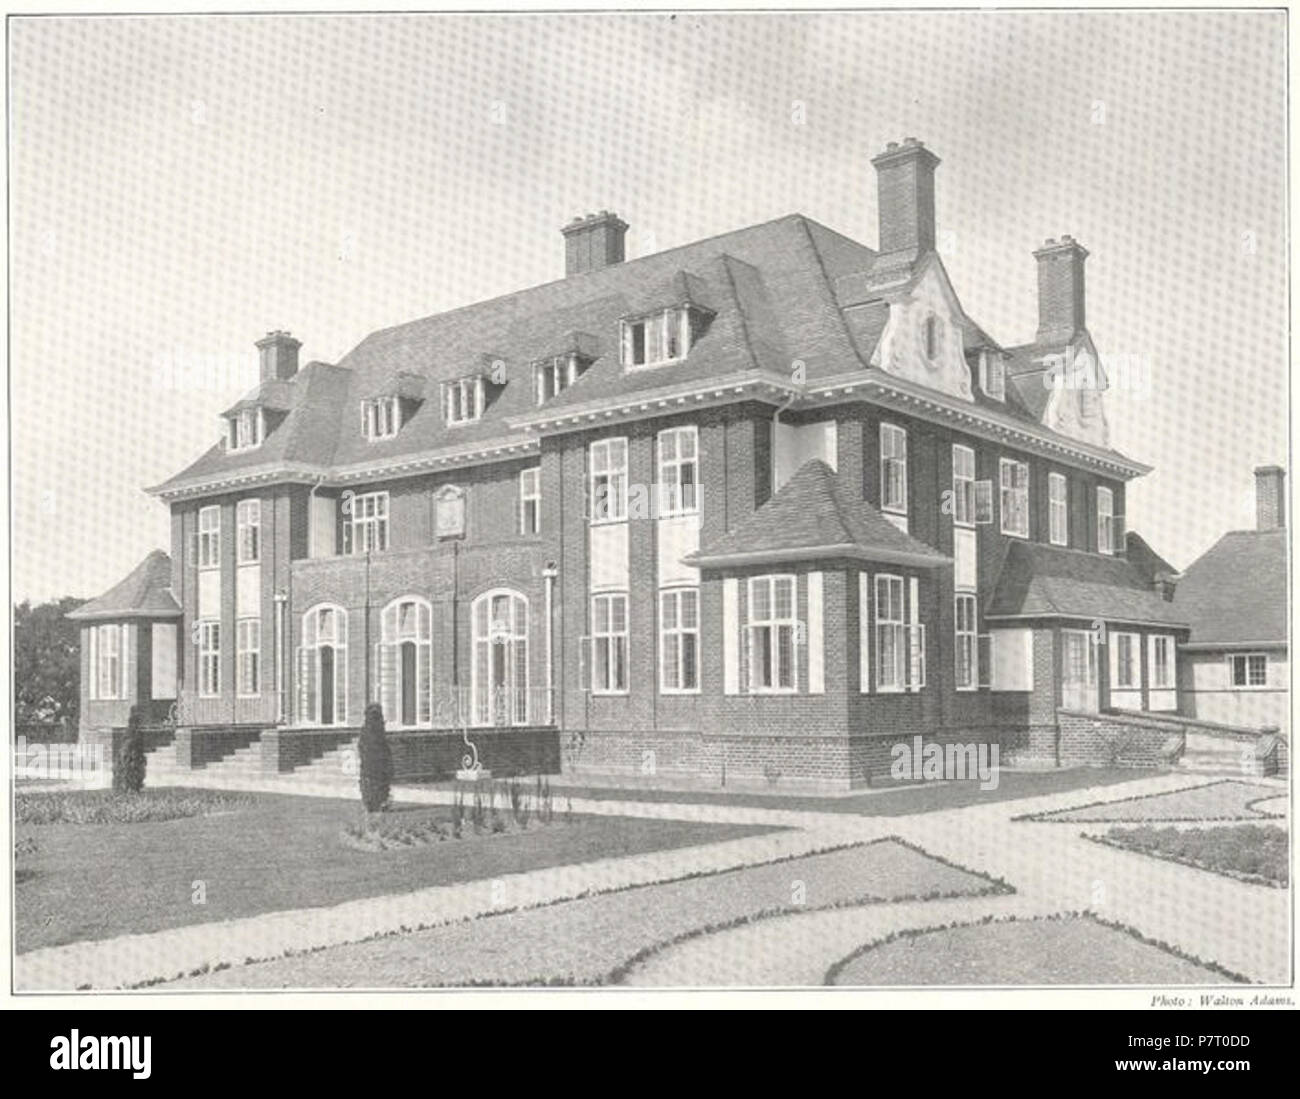 English: Arborfield Court, Arborfield. The garden front. 1900-1909. : House designed by Fairfax B. Wade, London. Photograph by Walton Adams, Reading. From 'The Architectural Review,' 1908.  This is a photo of listed building number 1118123.   . between 1900 and 1909 25 Arborfield Court, 1900-1909 Stock Photo